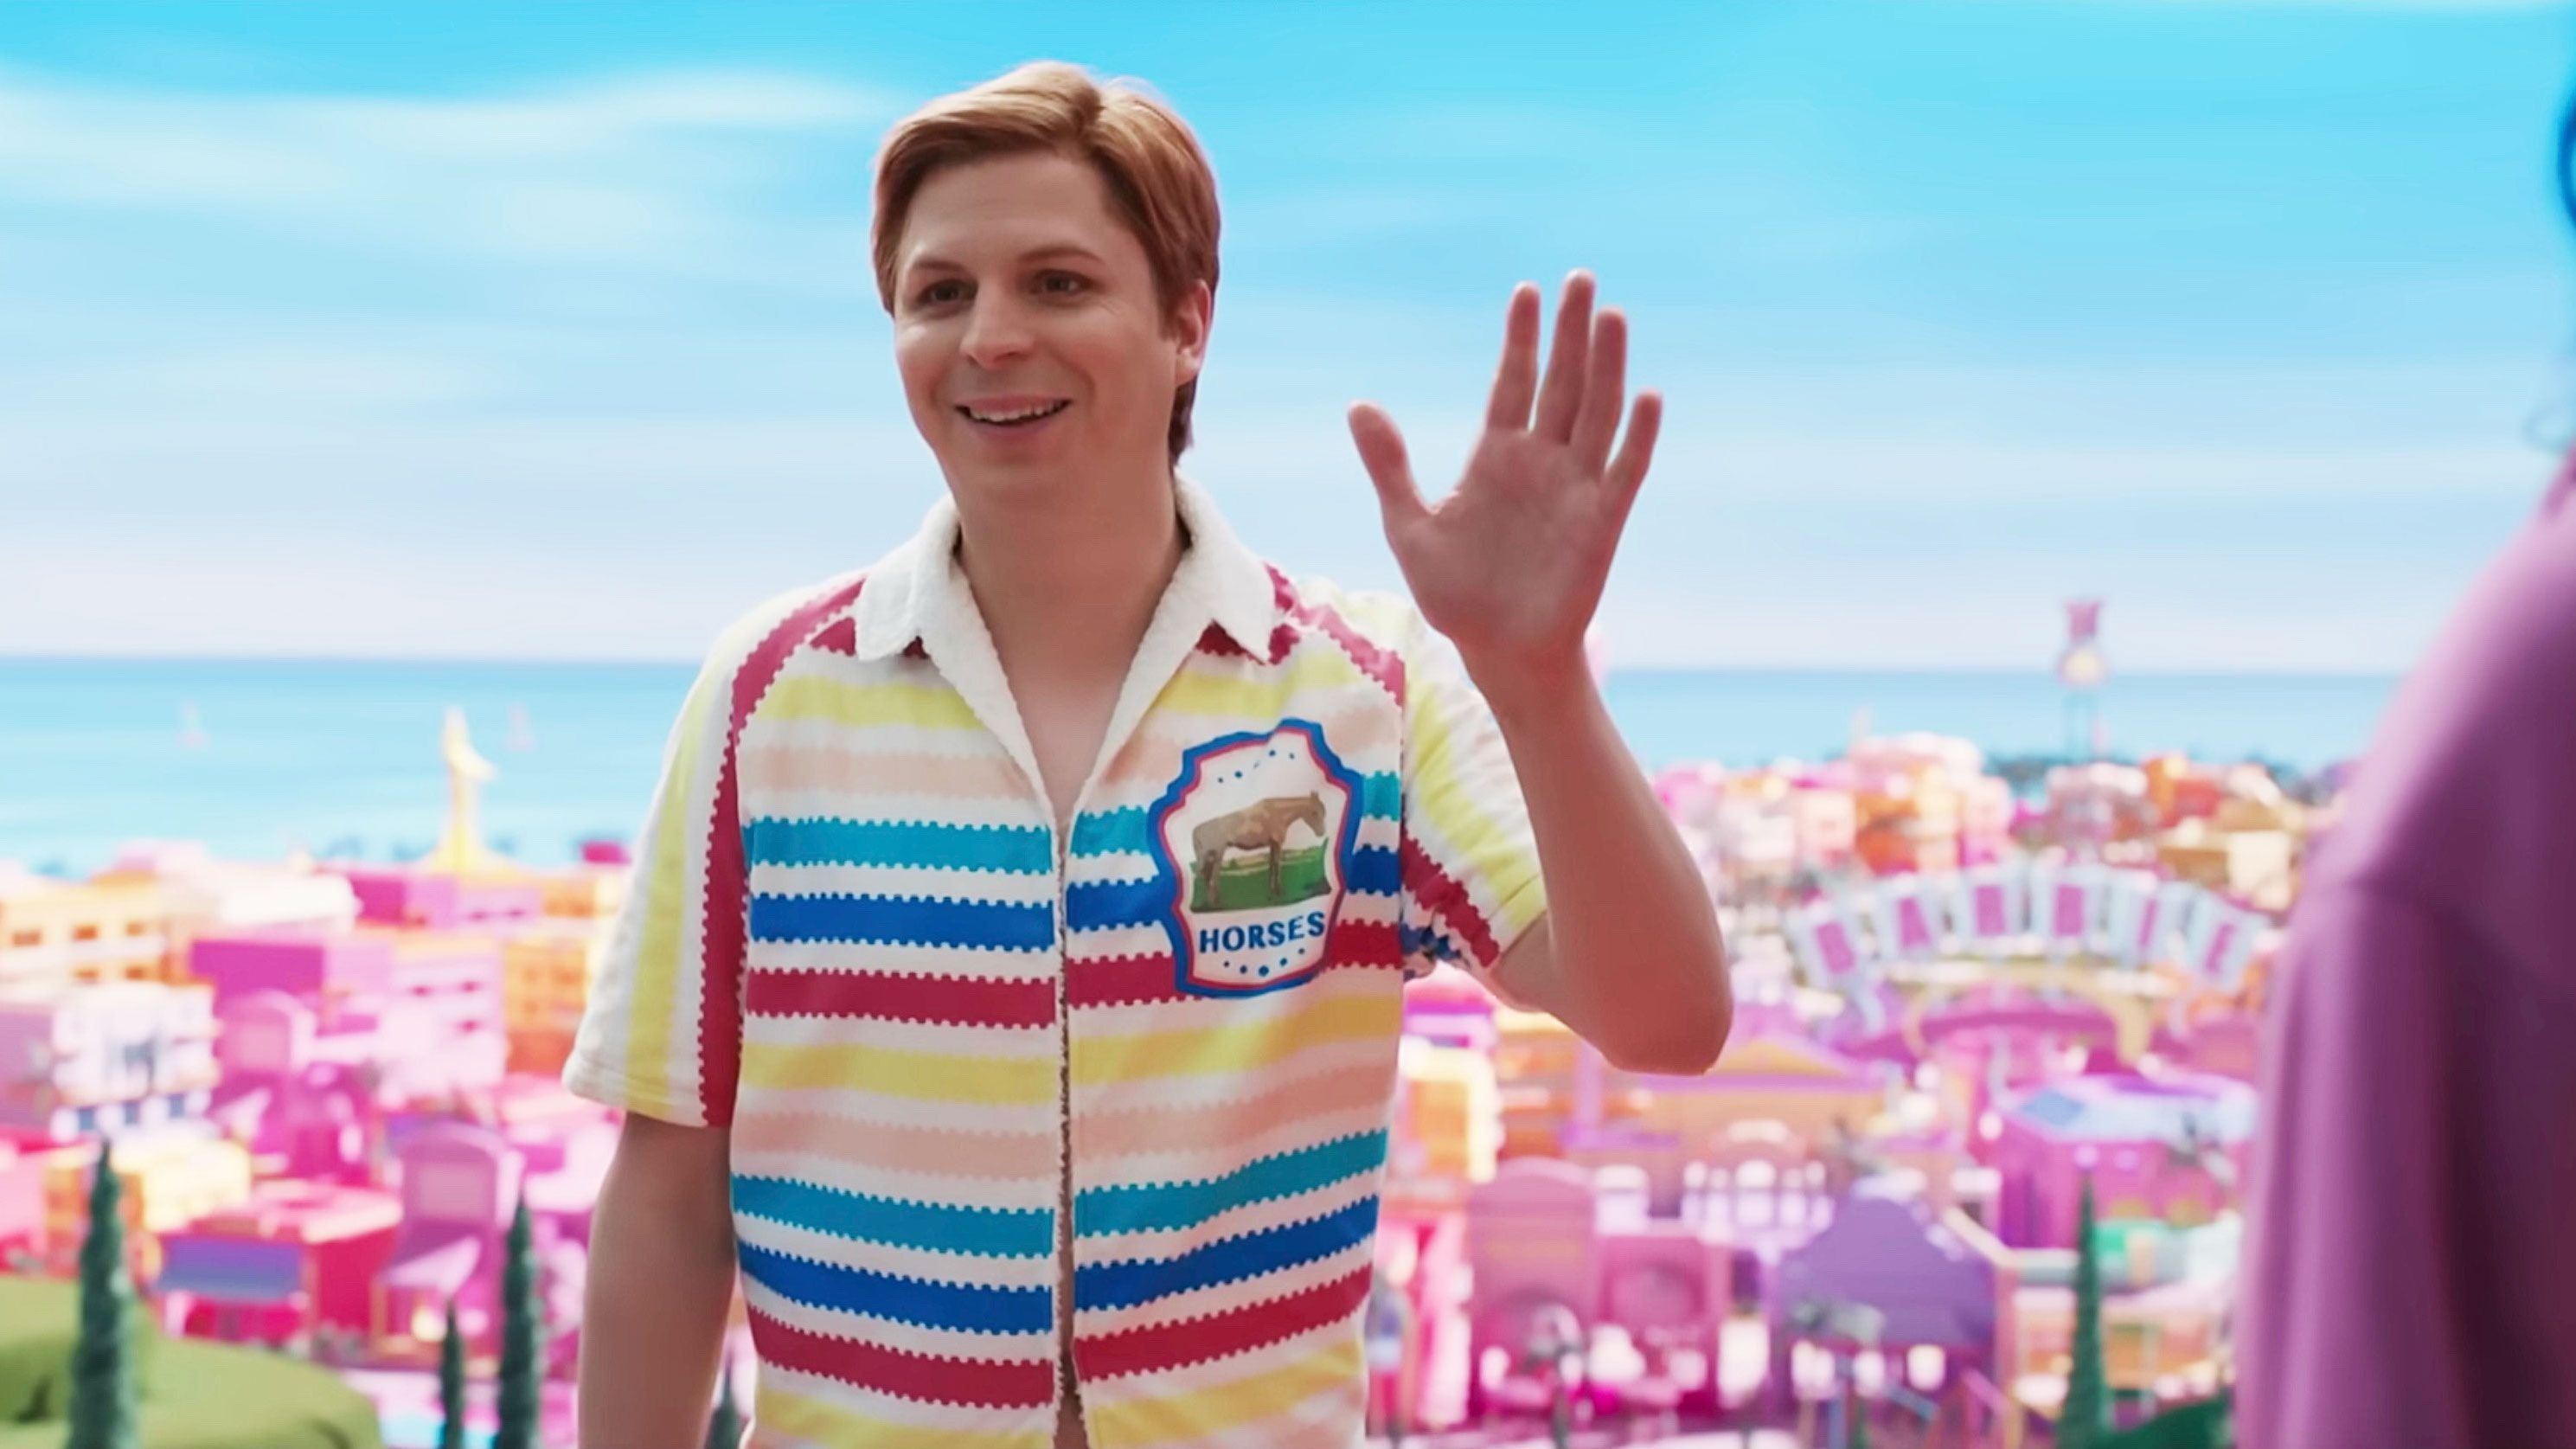 Michael Cera to appear in 'Barbie' movie as discontinued character Allan